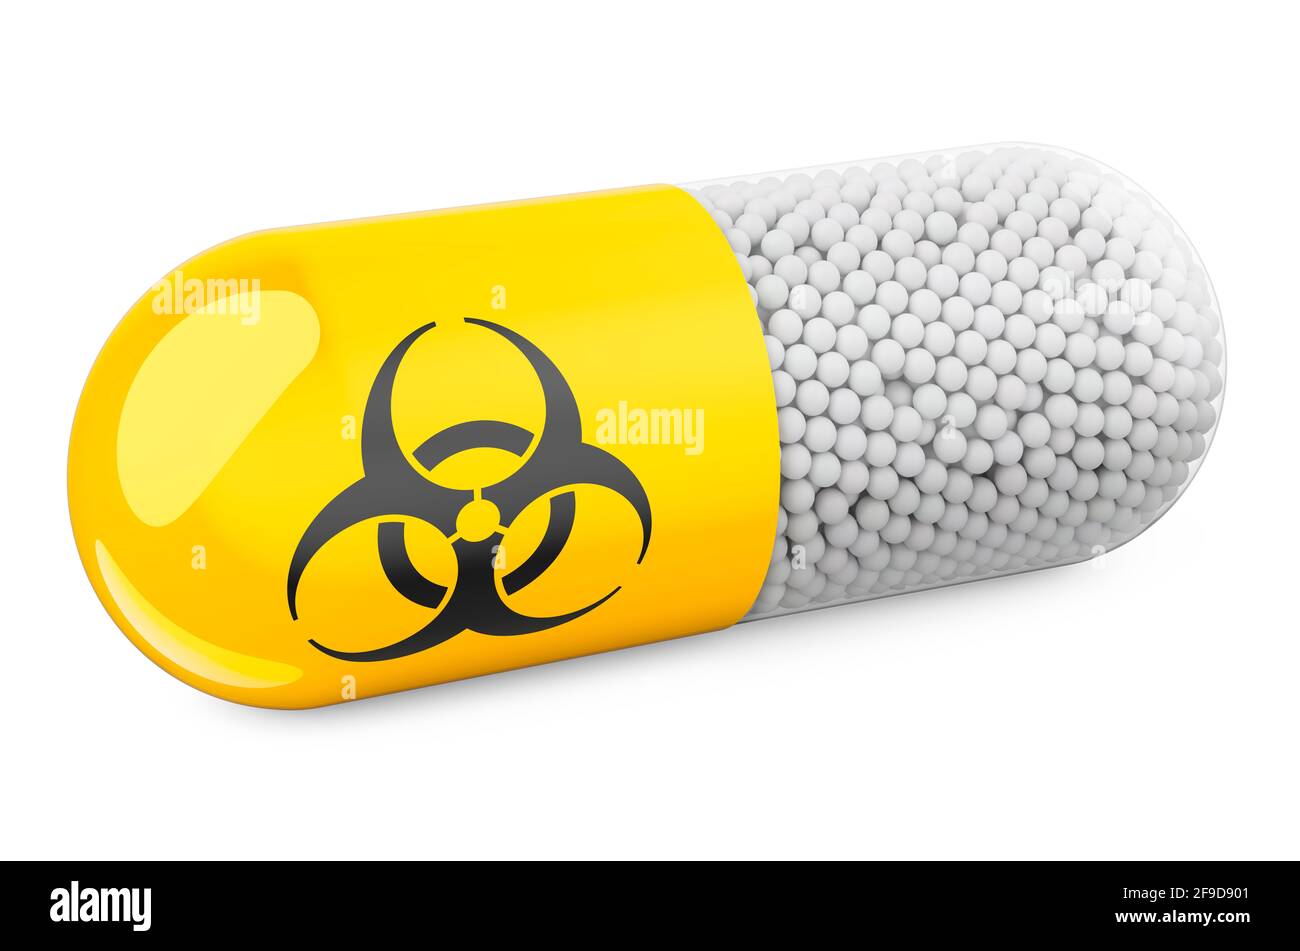 Pill capsule with biohazard symbol. 3D rendering isolated on white background Stock Photo